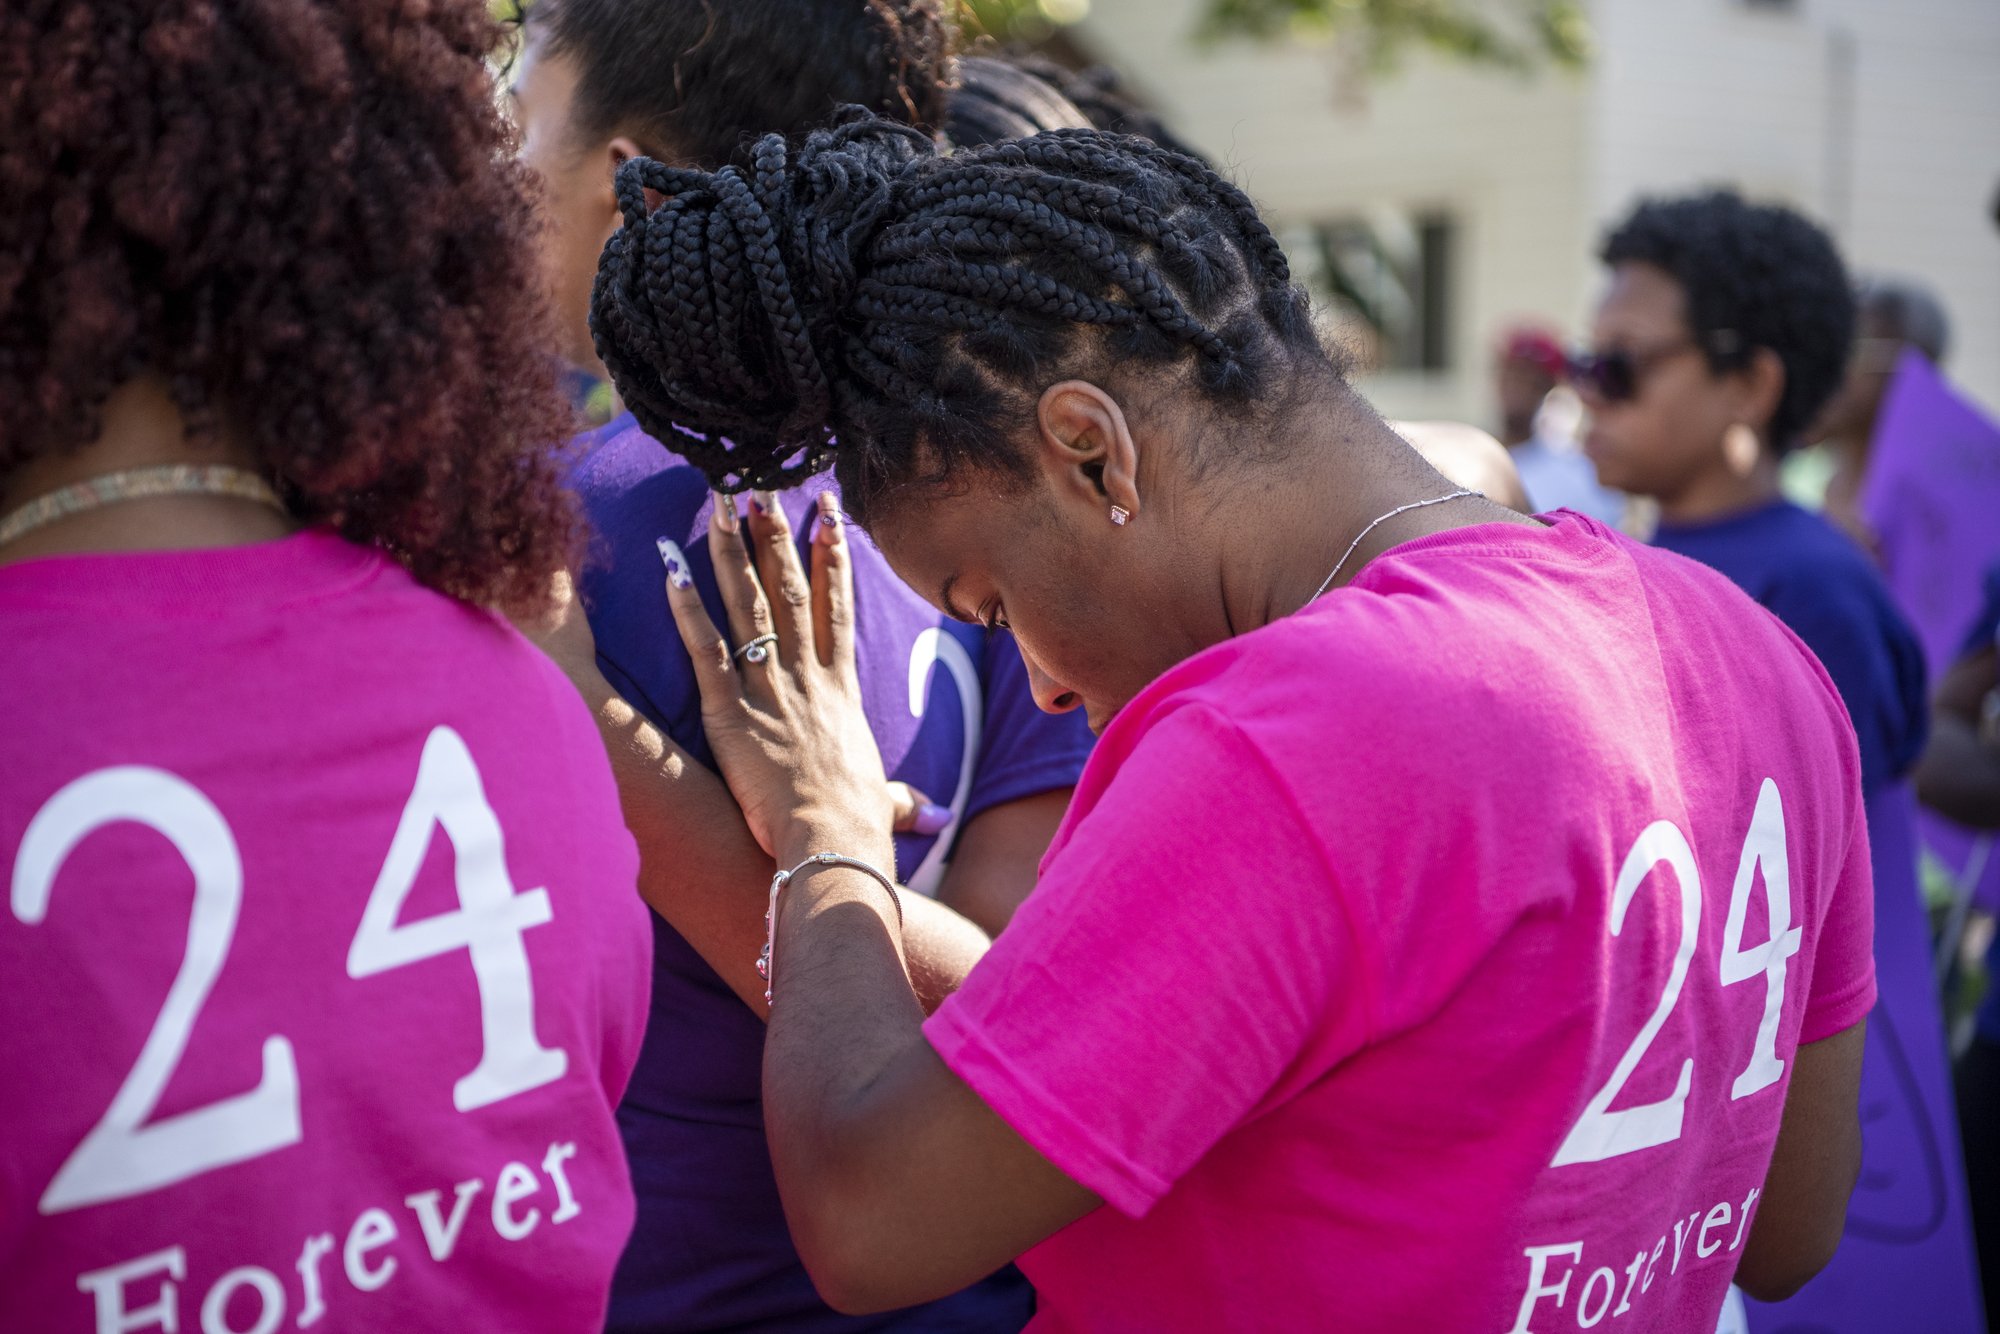  Ciera Caldwell leans on Kiara Richardson for support during a march for her 24-year-old cousin Eniyah Hollins in Battle Creek, Michigan on Thursday, July 1. Hollins was shot and killed at a house party on Hanover Street early Sunday morning, her fam